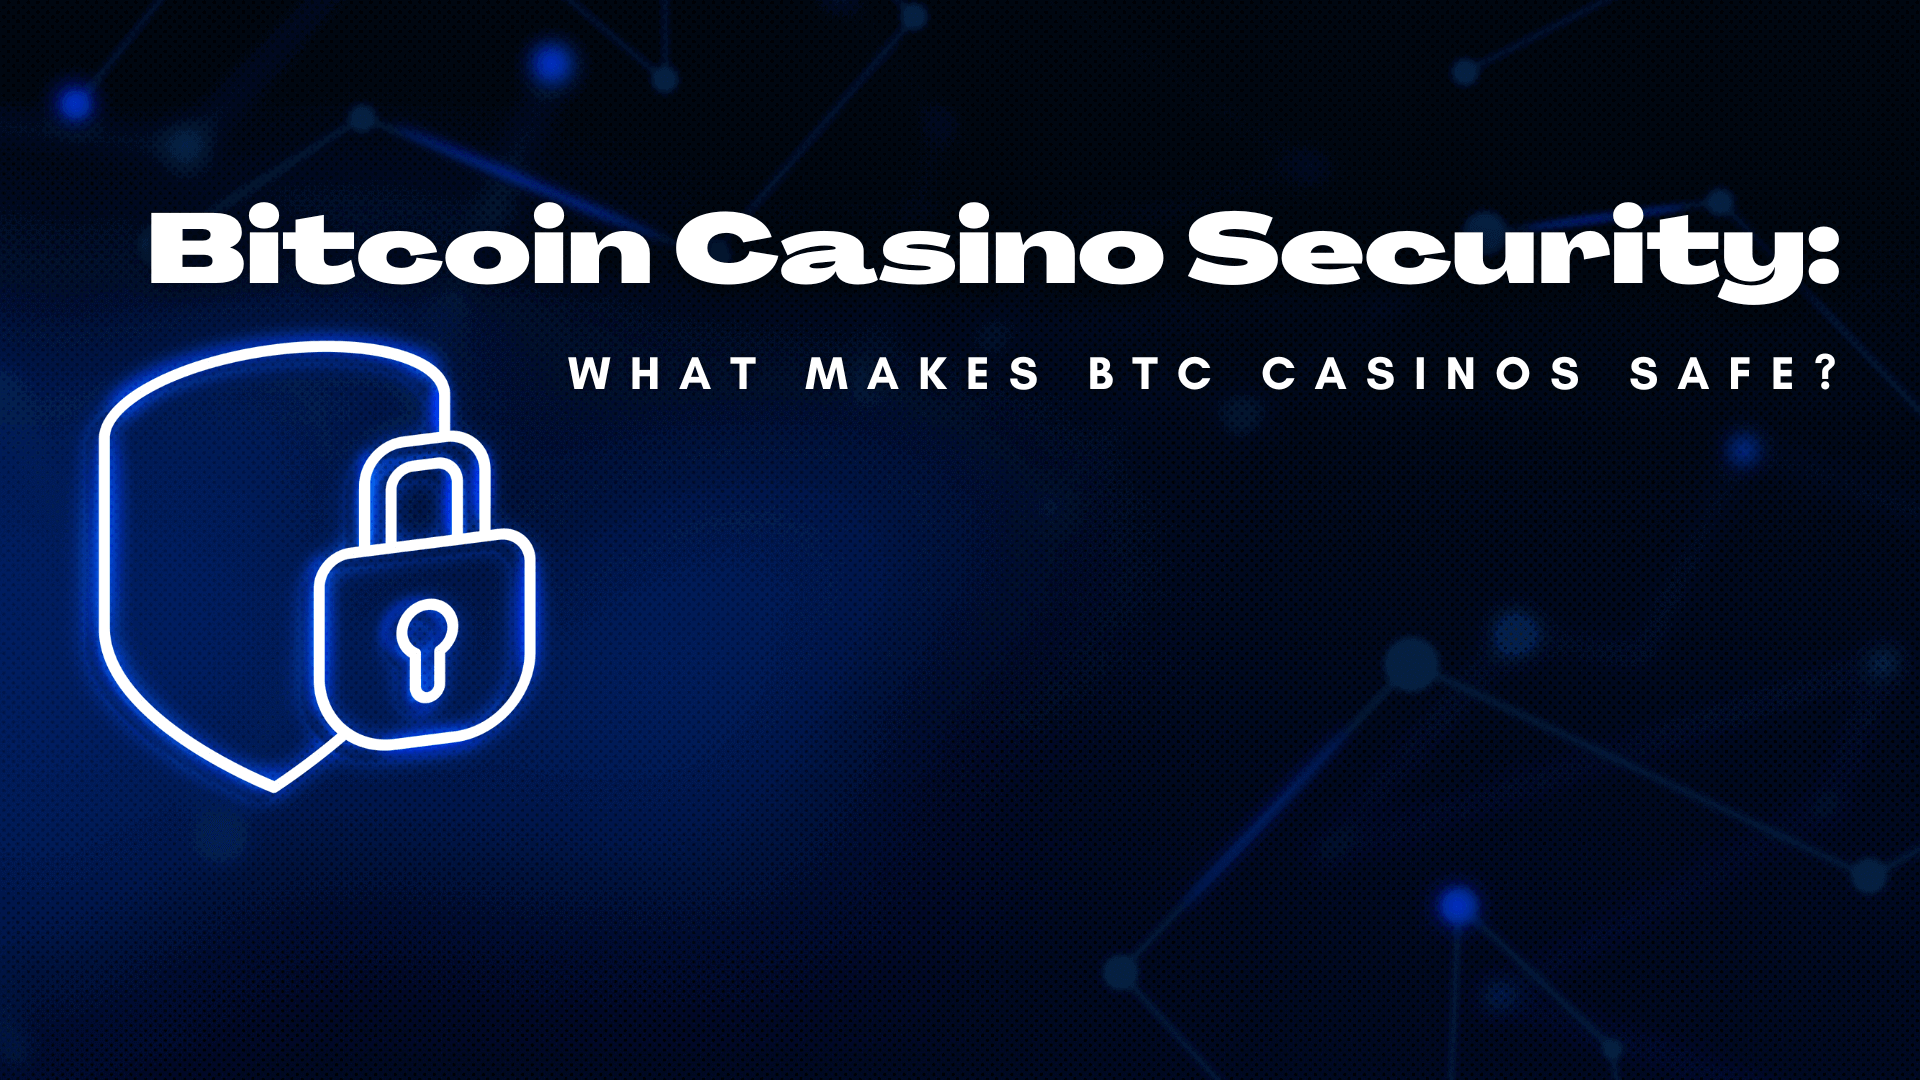 Advanced Strategies for Serious play bitcoin casino game Players